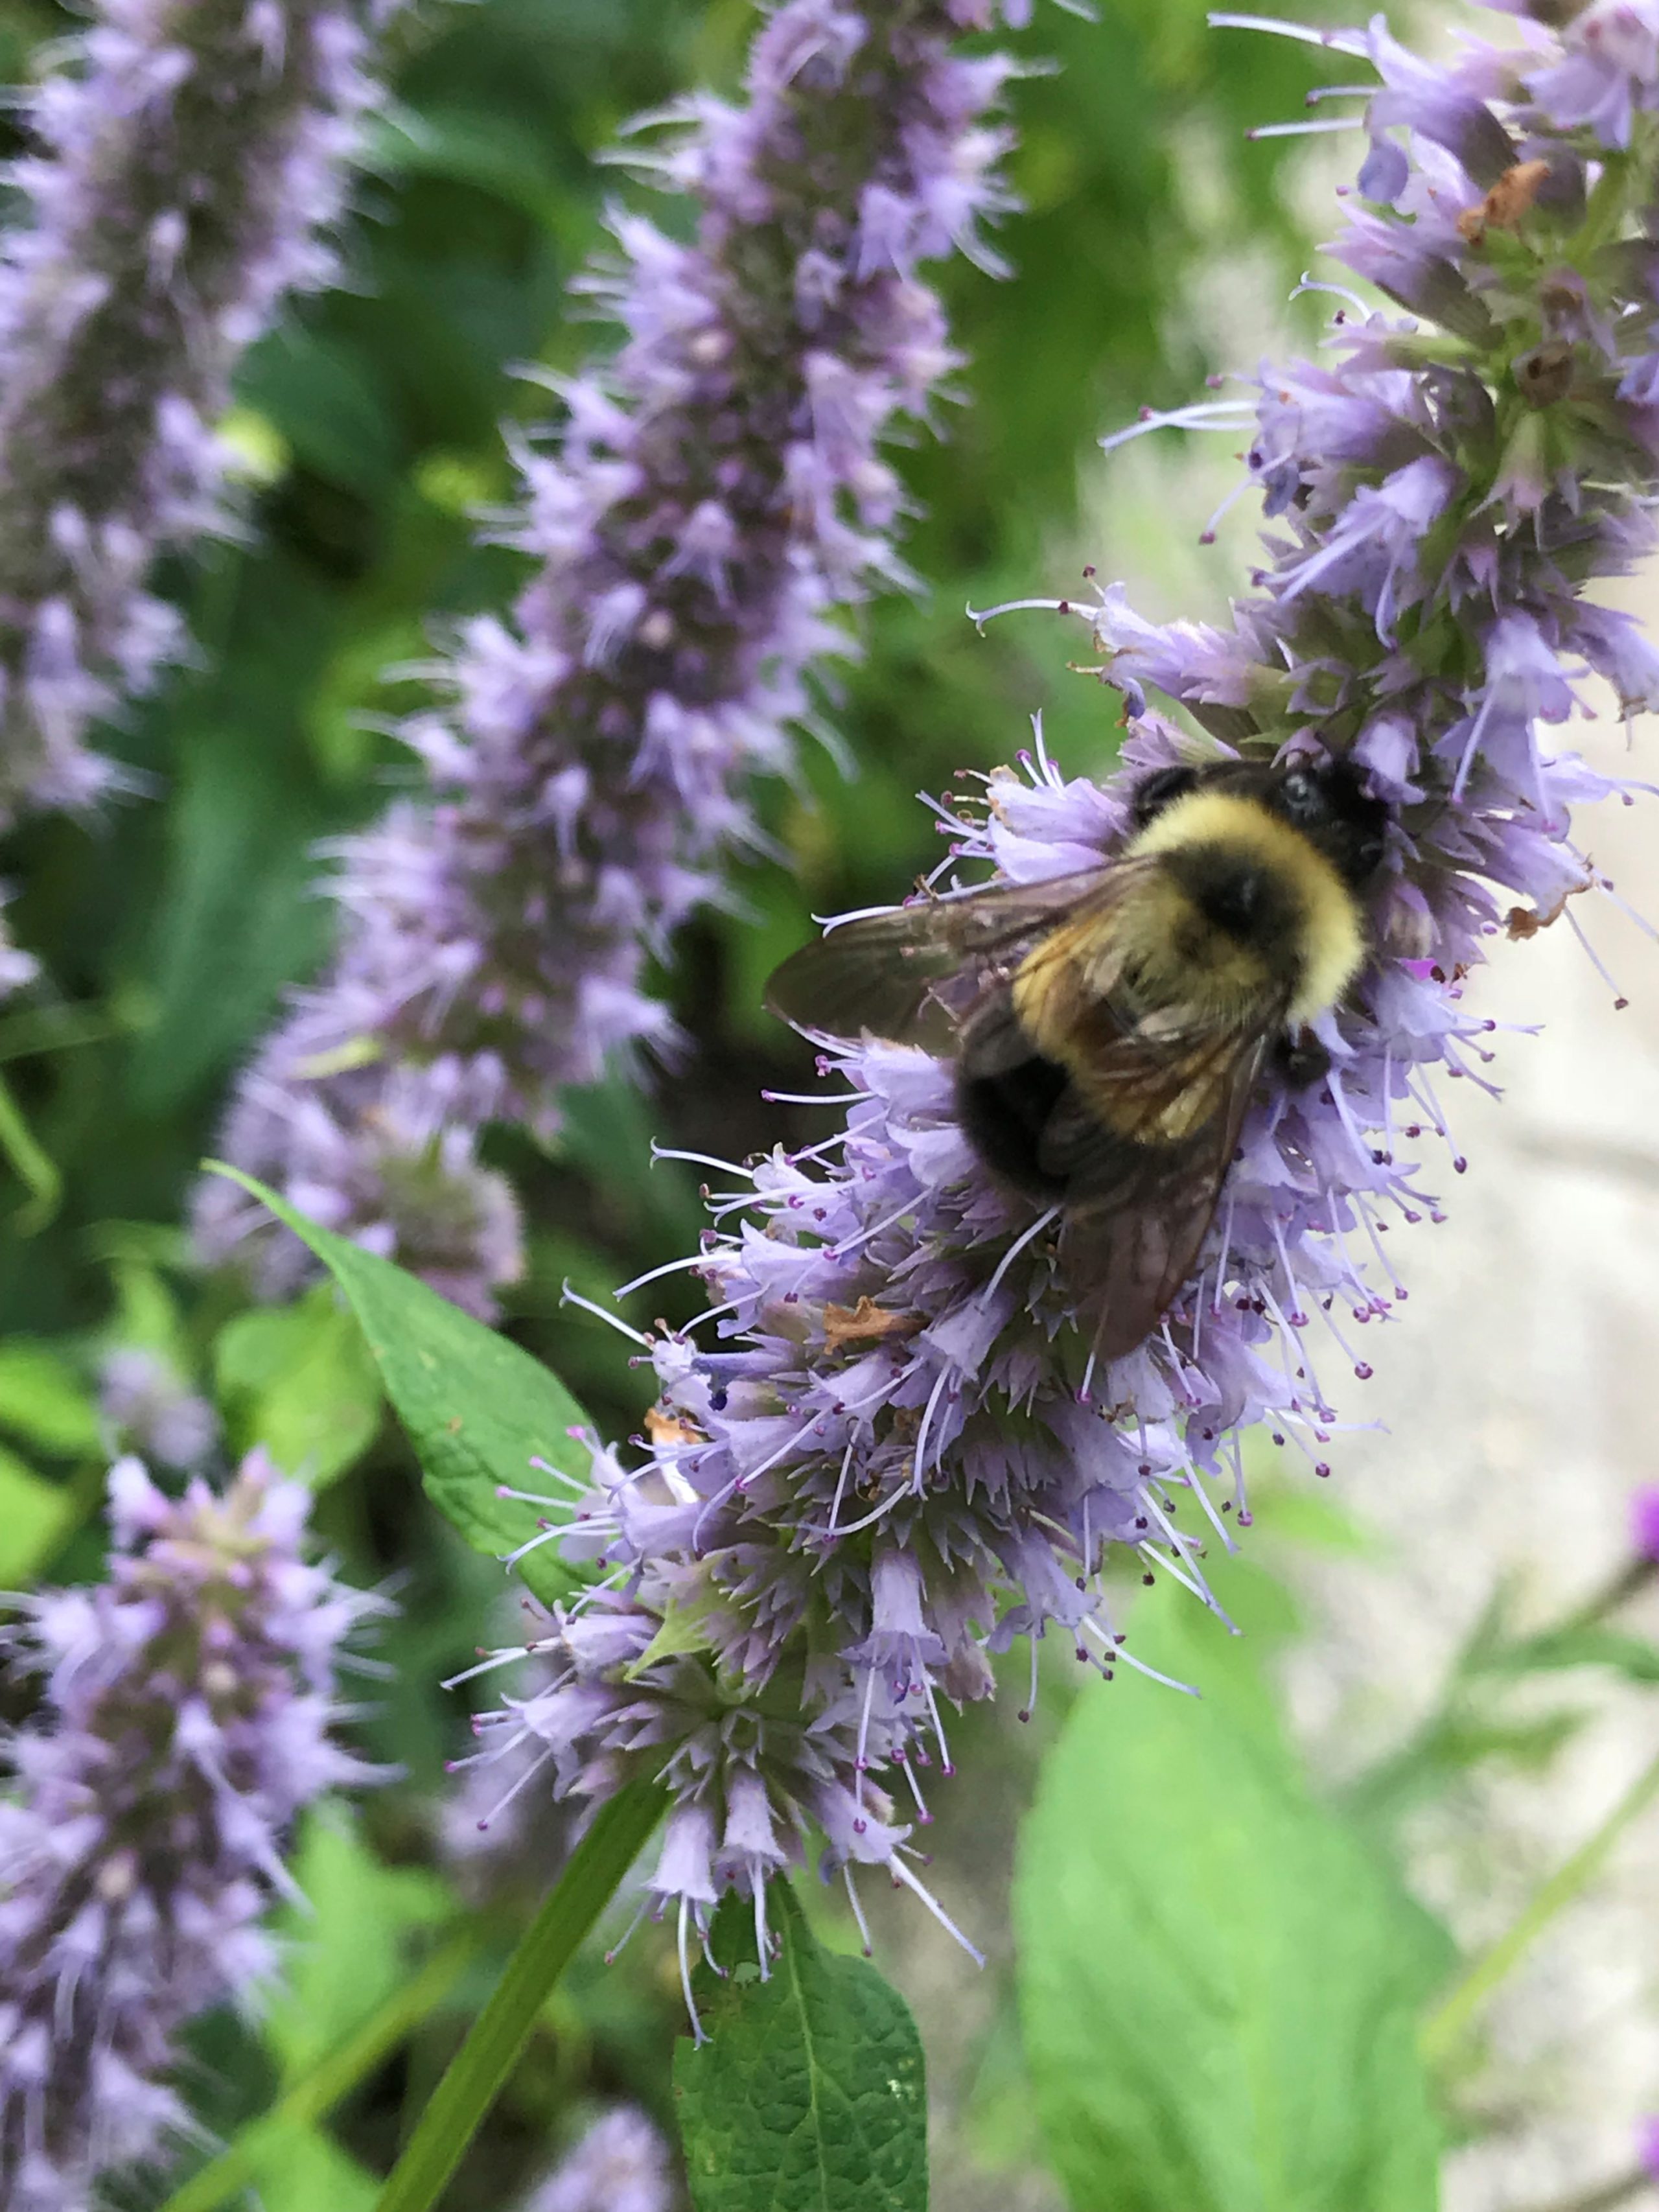 The rare rusty-patched bumble bee spotted on St. Thomas' St. Paul campus.